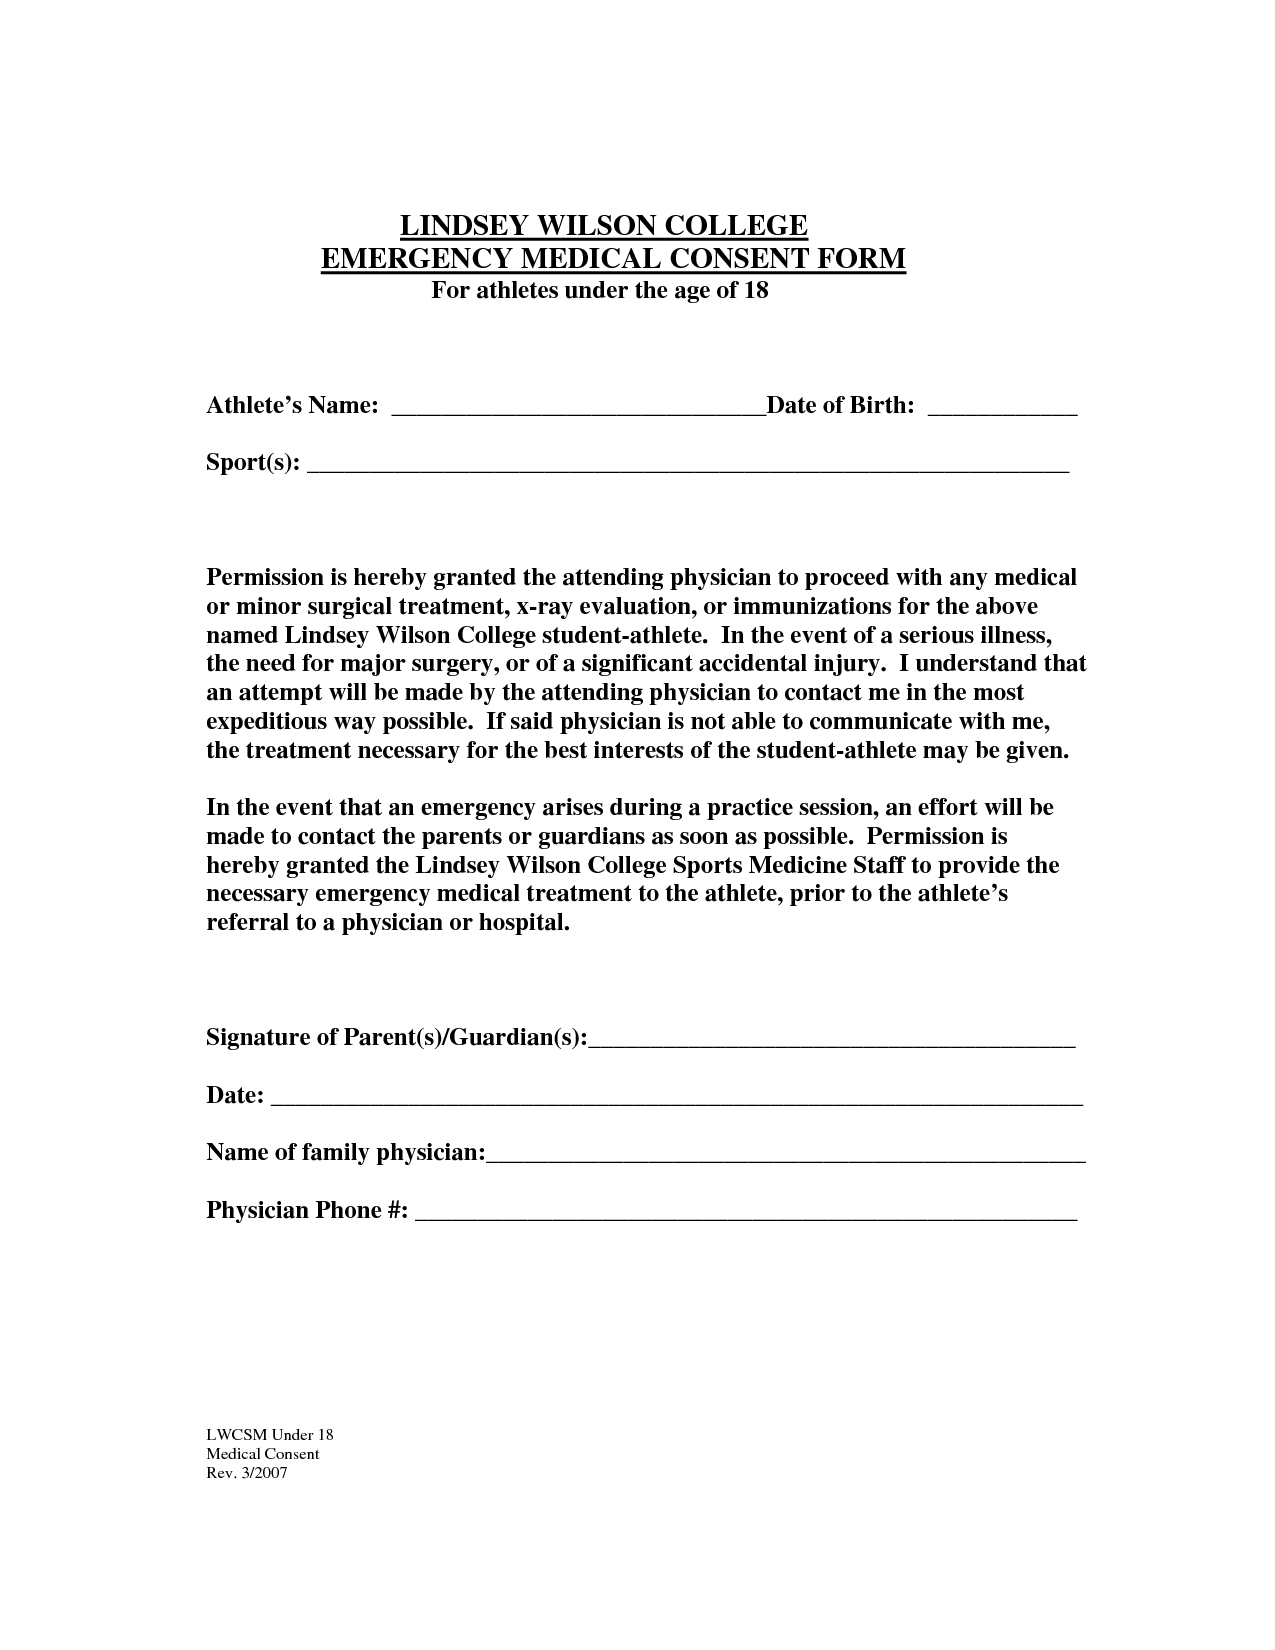 parental-consent-form-for-medical-treatment-free-printable-documents